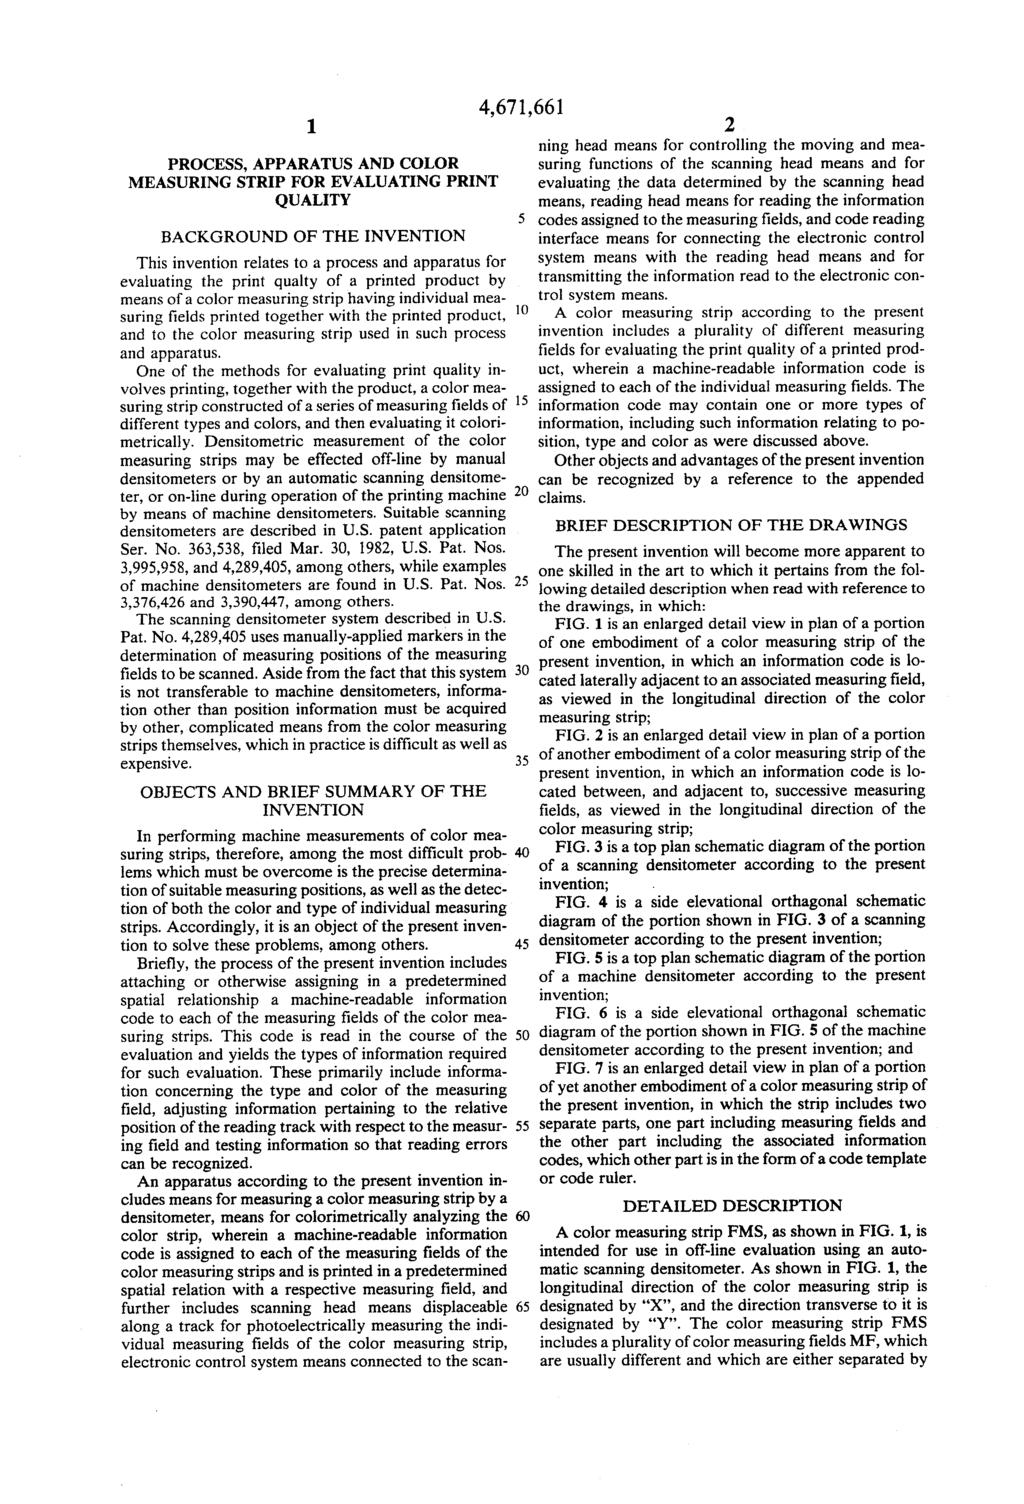 1 PROCESS, APPARATUS AND COLOR MEASURING STRIP FOR EVALUATNG PRINT QUALITY BACKGROUND OF THE INVENTION This invention relates to a process and apparatus for evaluating the print quality of a printed